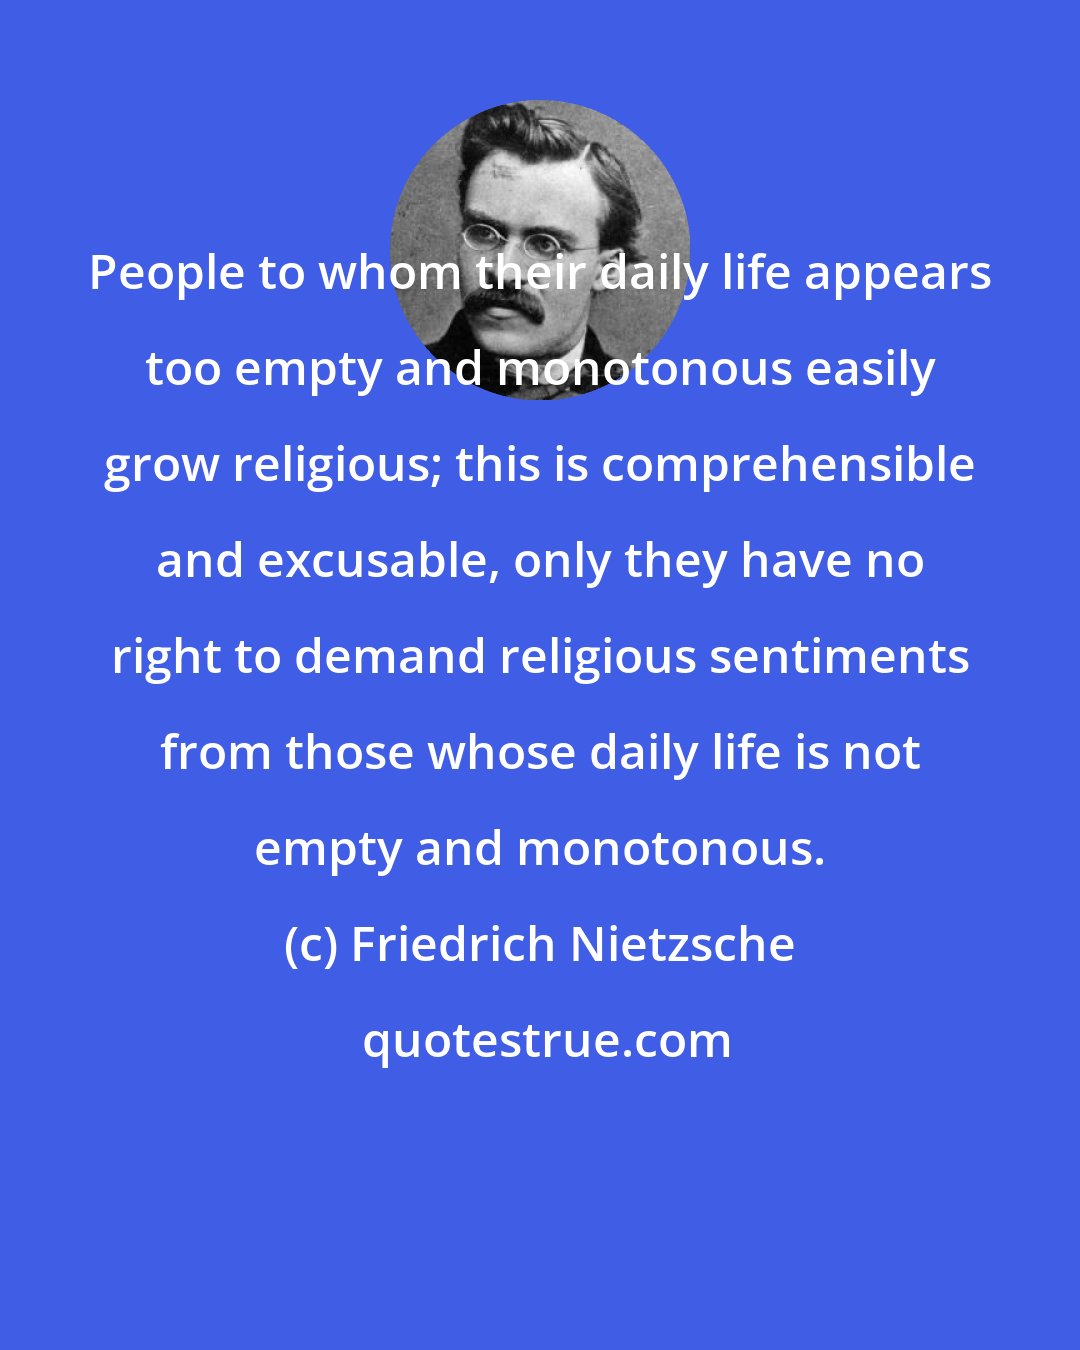 Friedrich Nietzsche: People to whom their daily life appears too empty and monotonous easily grow religious; this is comprehensible and excusable, only they have no right to demand religious sentiments from those whose daily life is not empty and monotonous.